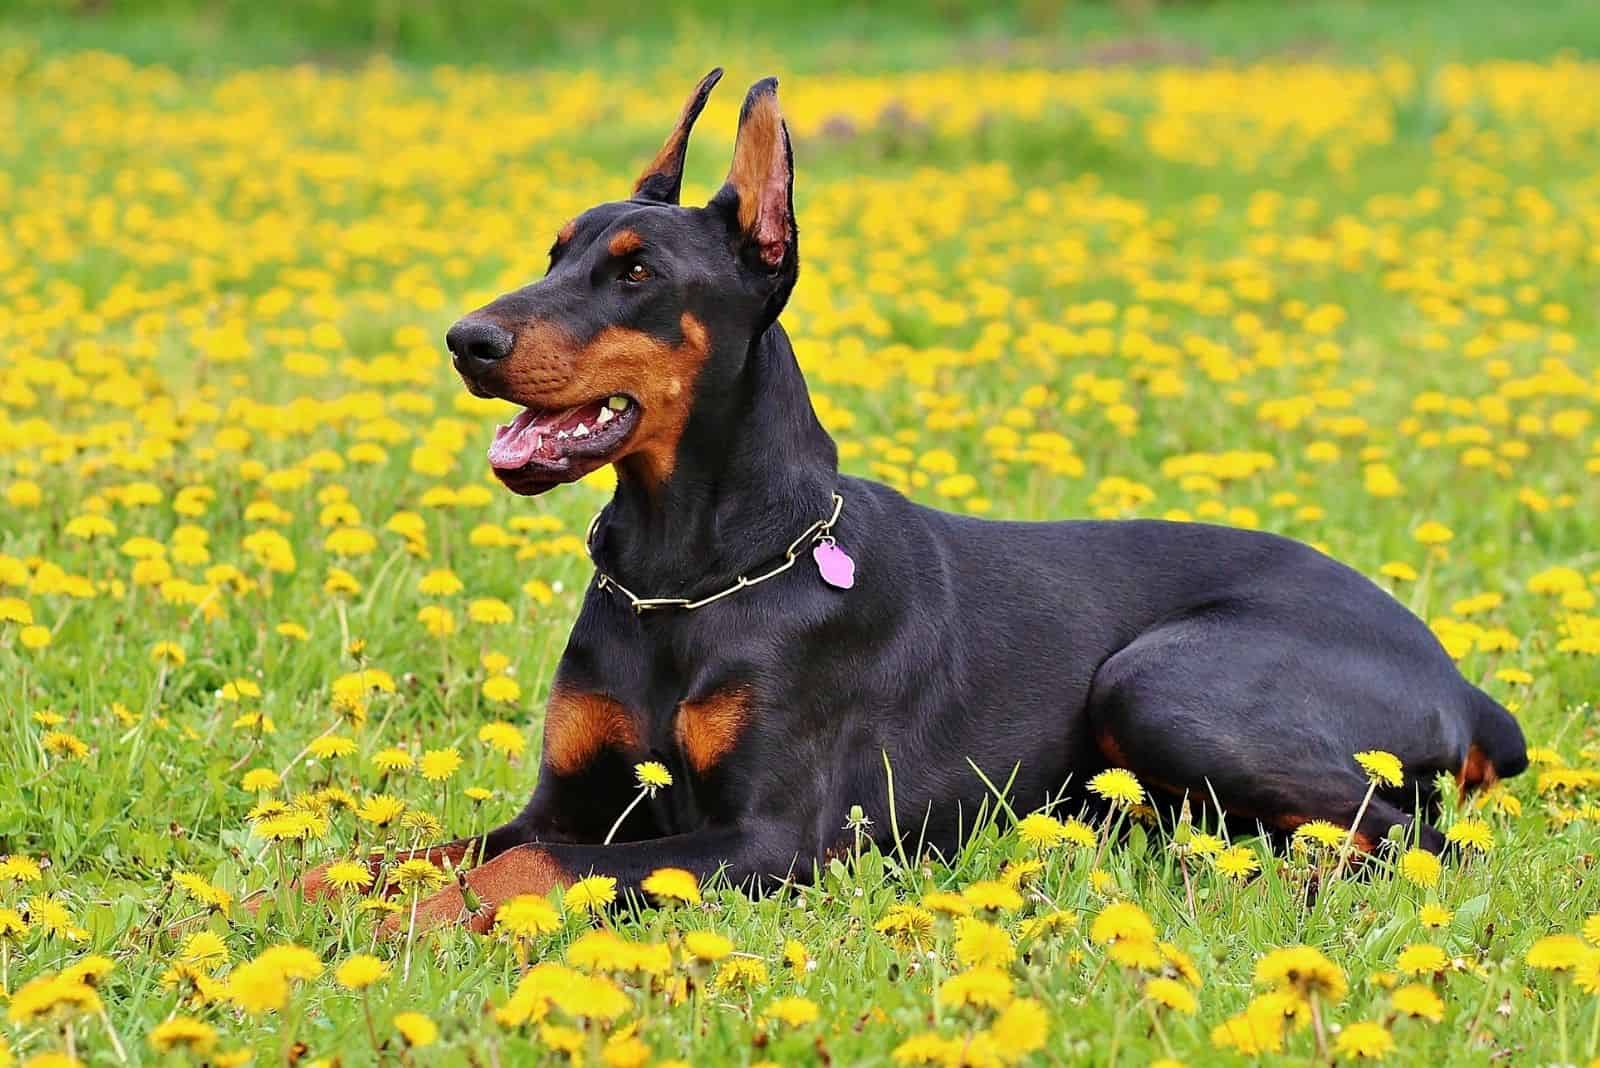 beautiful doberman relaxing and sitting in the yellow flower field outdoors